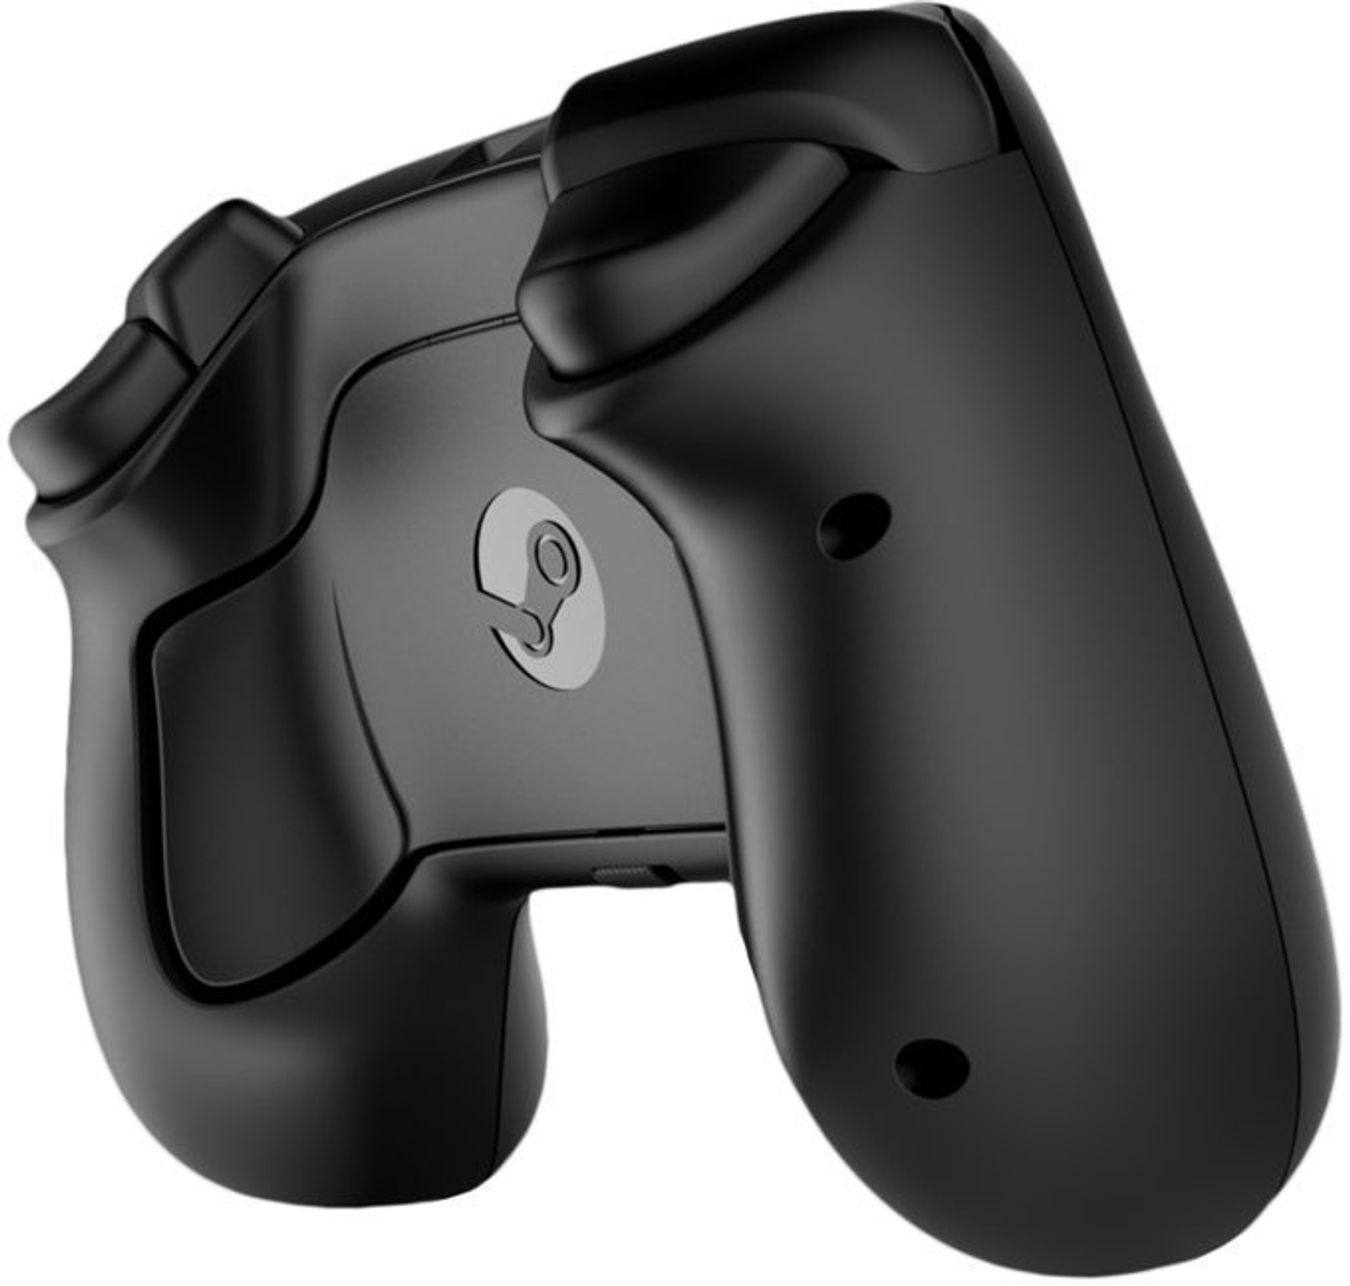 configure controller for steam on mac